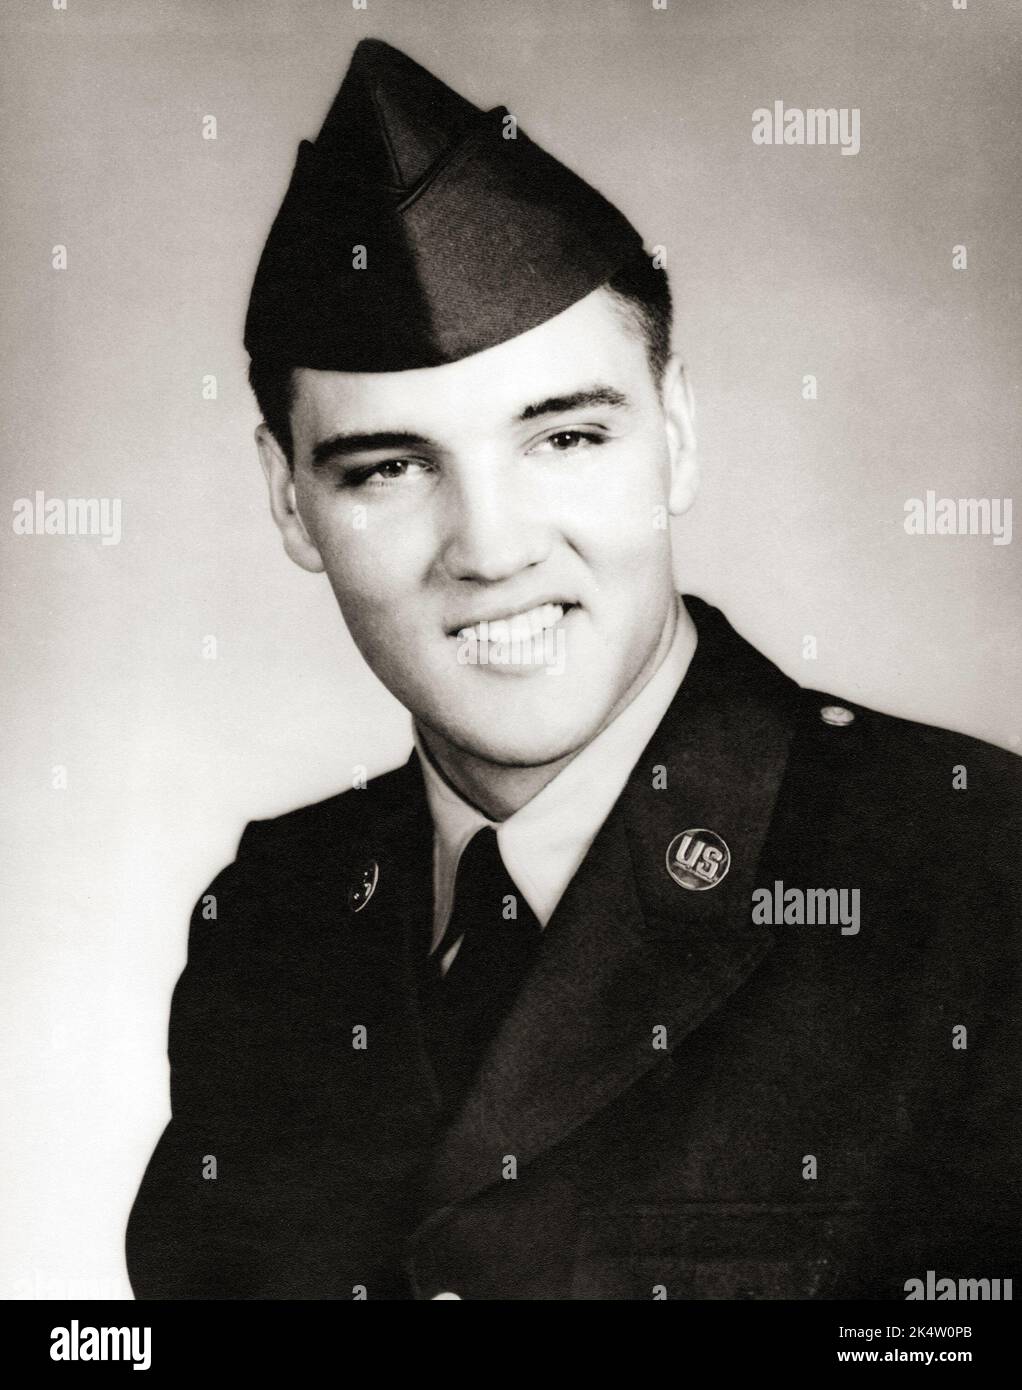 Photo of Elvis Presley in uniform with garrison cap - From March 1958 to March 1960 Presley served as a member of the United States Army and held the rank of staff sergeant Stock Photo